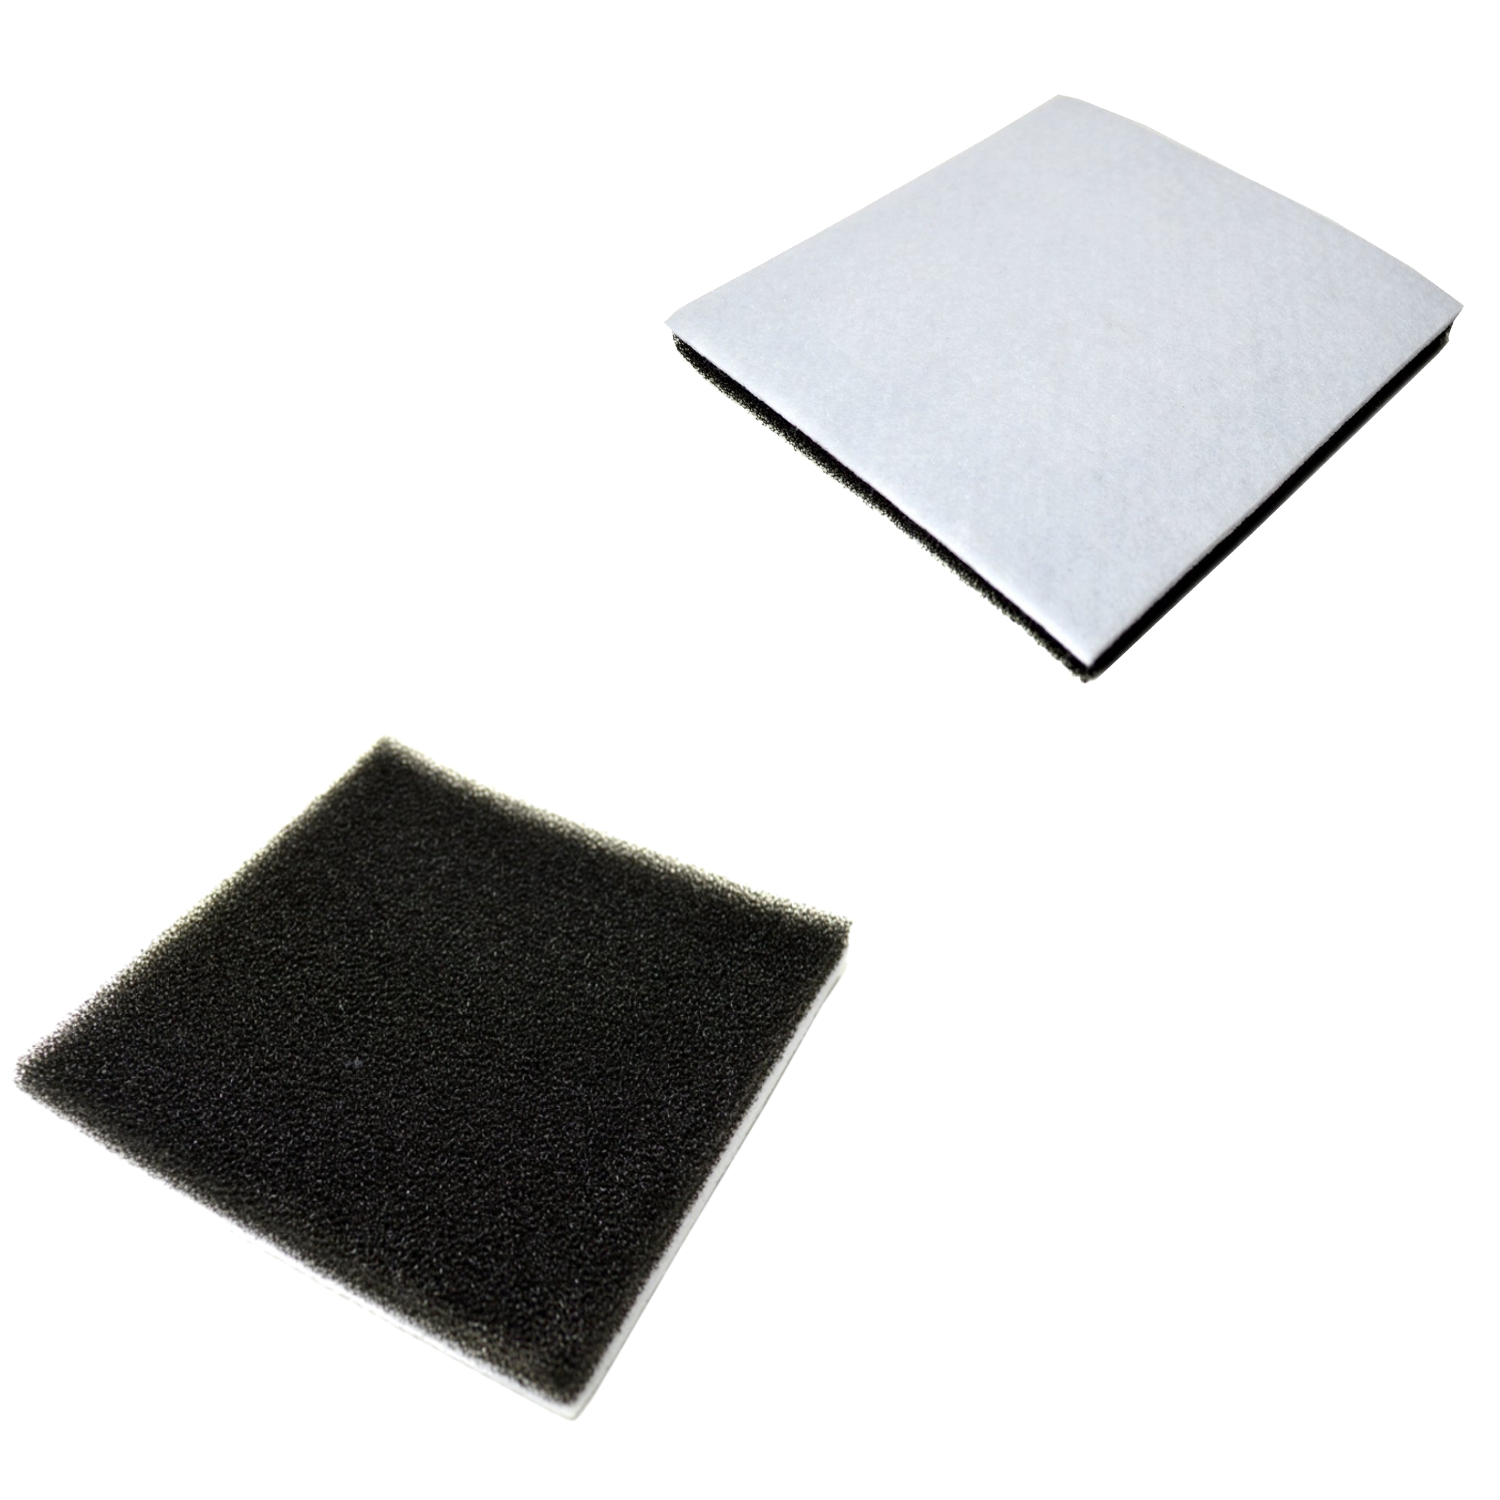 HQRP 2-Pack Foam Filter for Kenmore 116.20612003, 116.22313200, 116.24212401, 116.2971390, 116.29713990, 116.29713991, 116.29713992